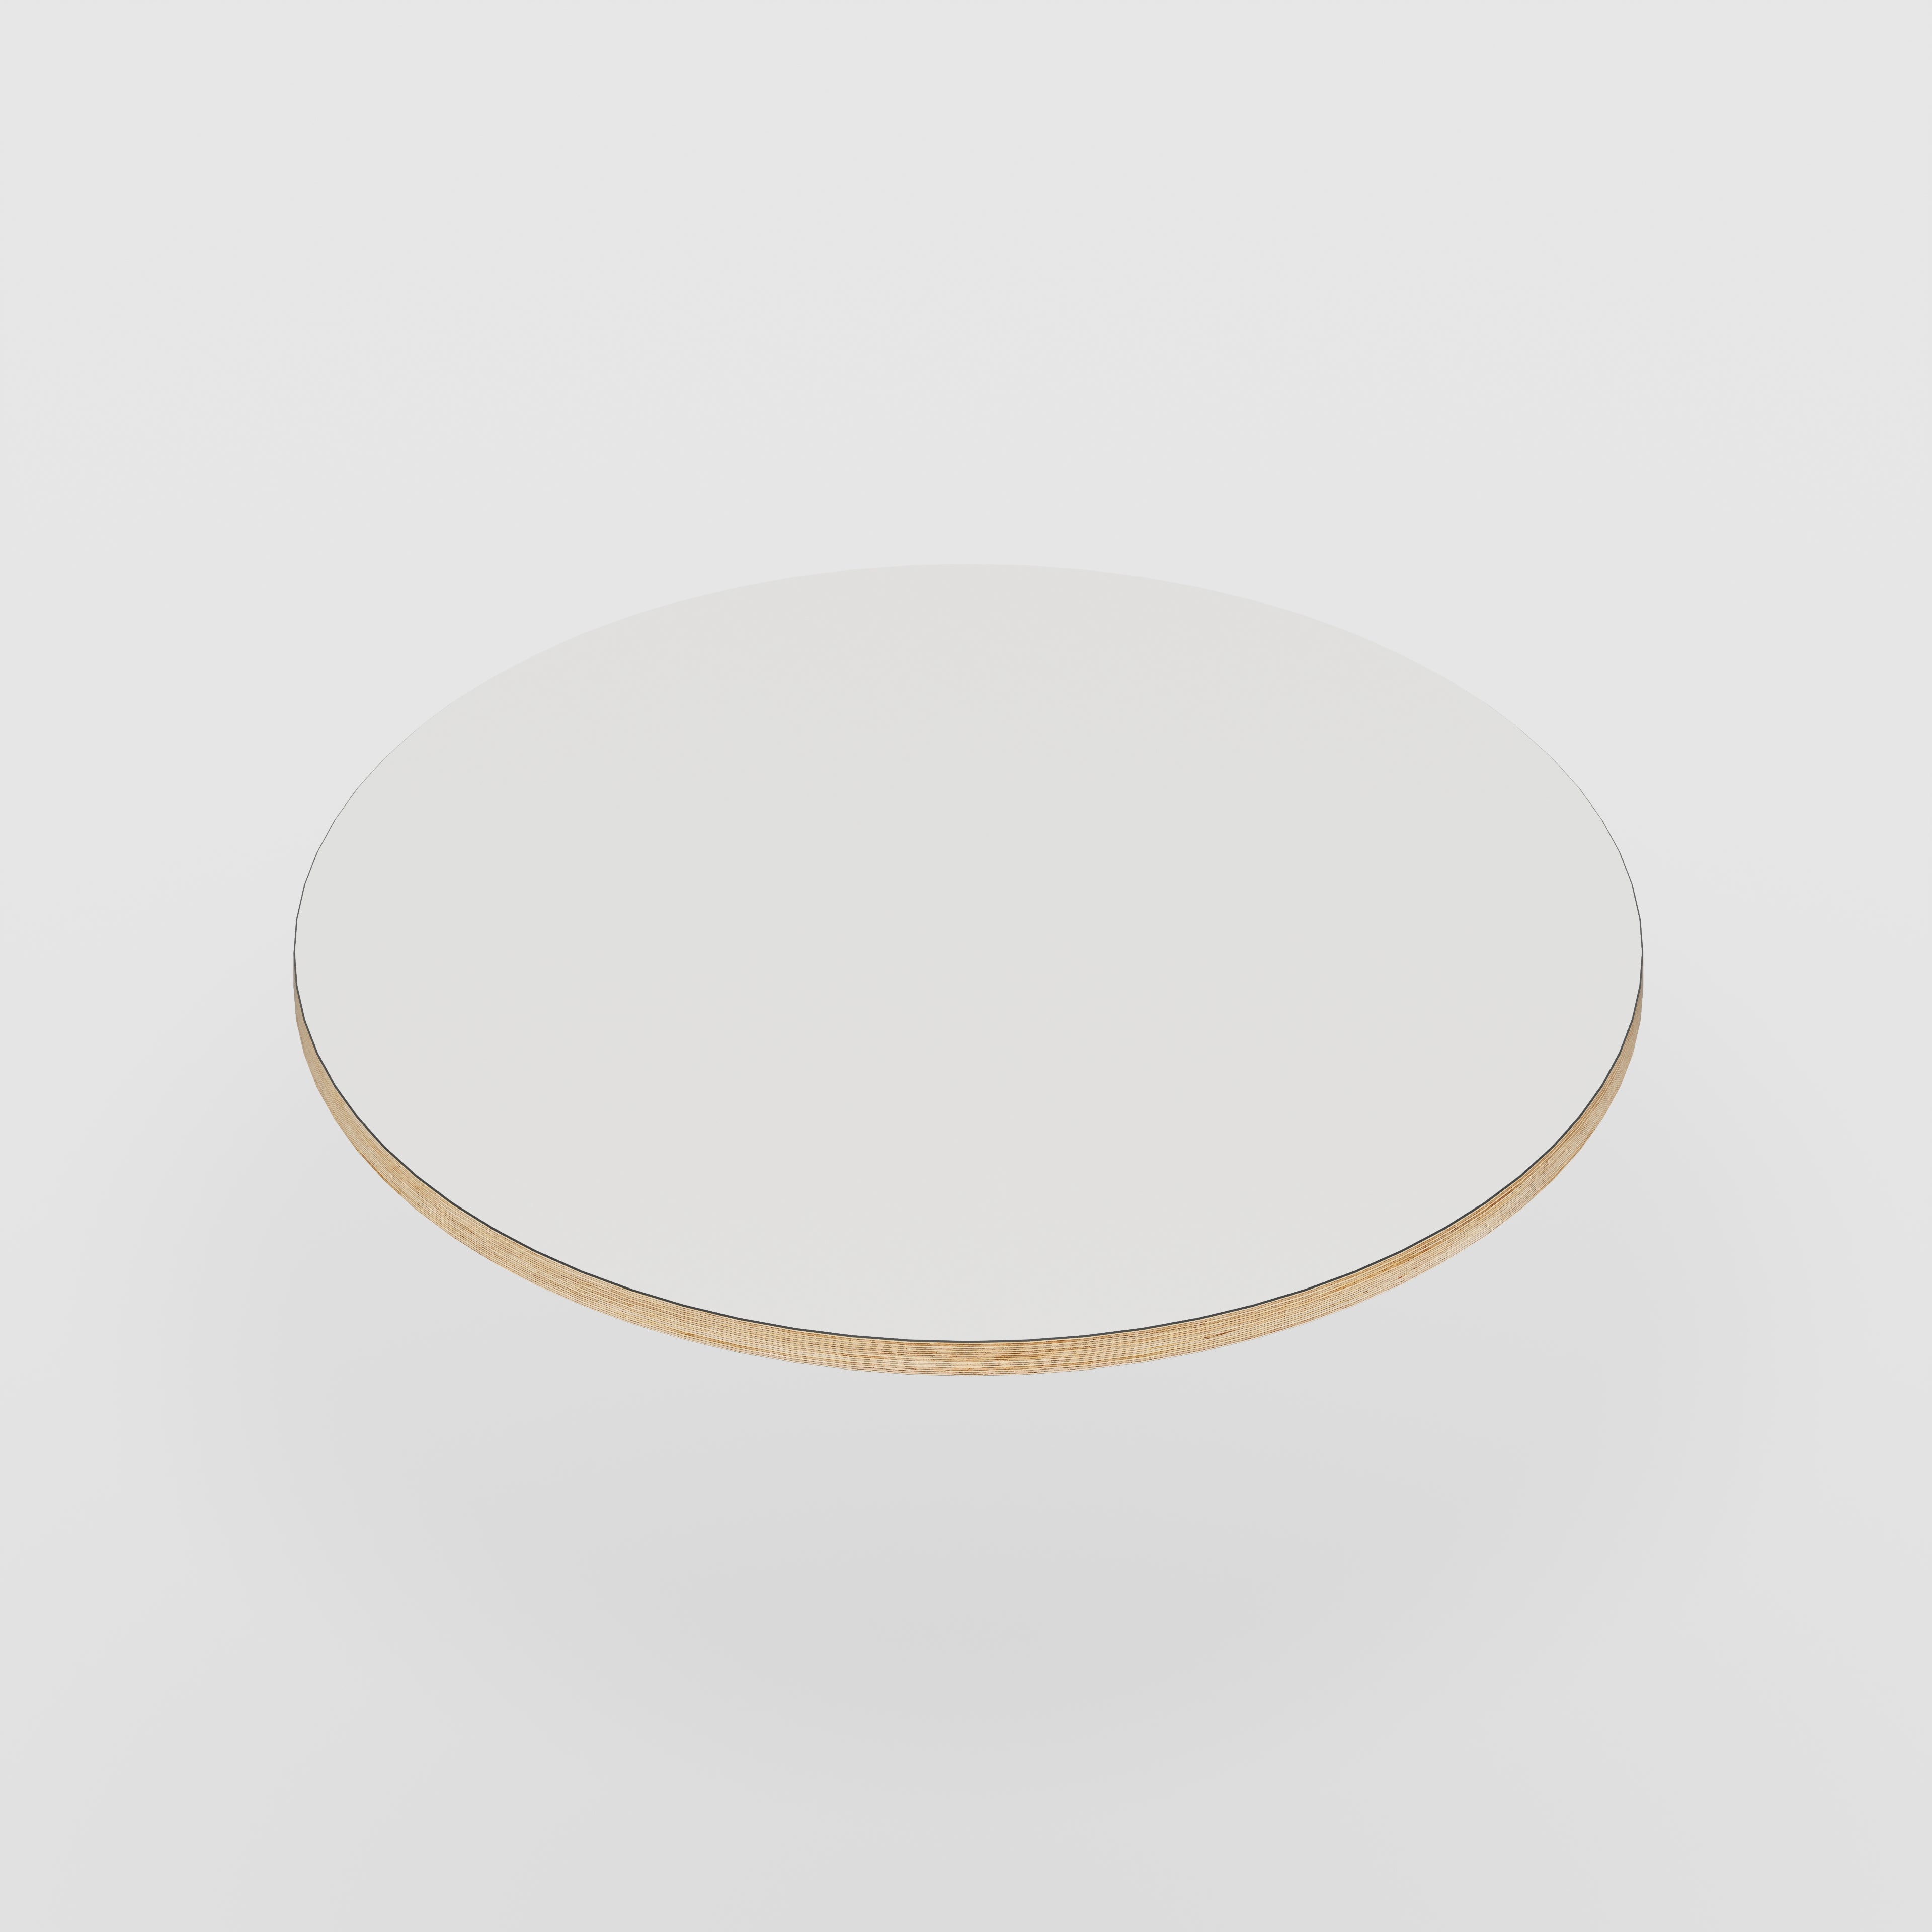 Plywood Round Tabletop - Formica Fog - 800(dia) - 18mm